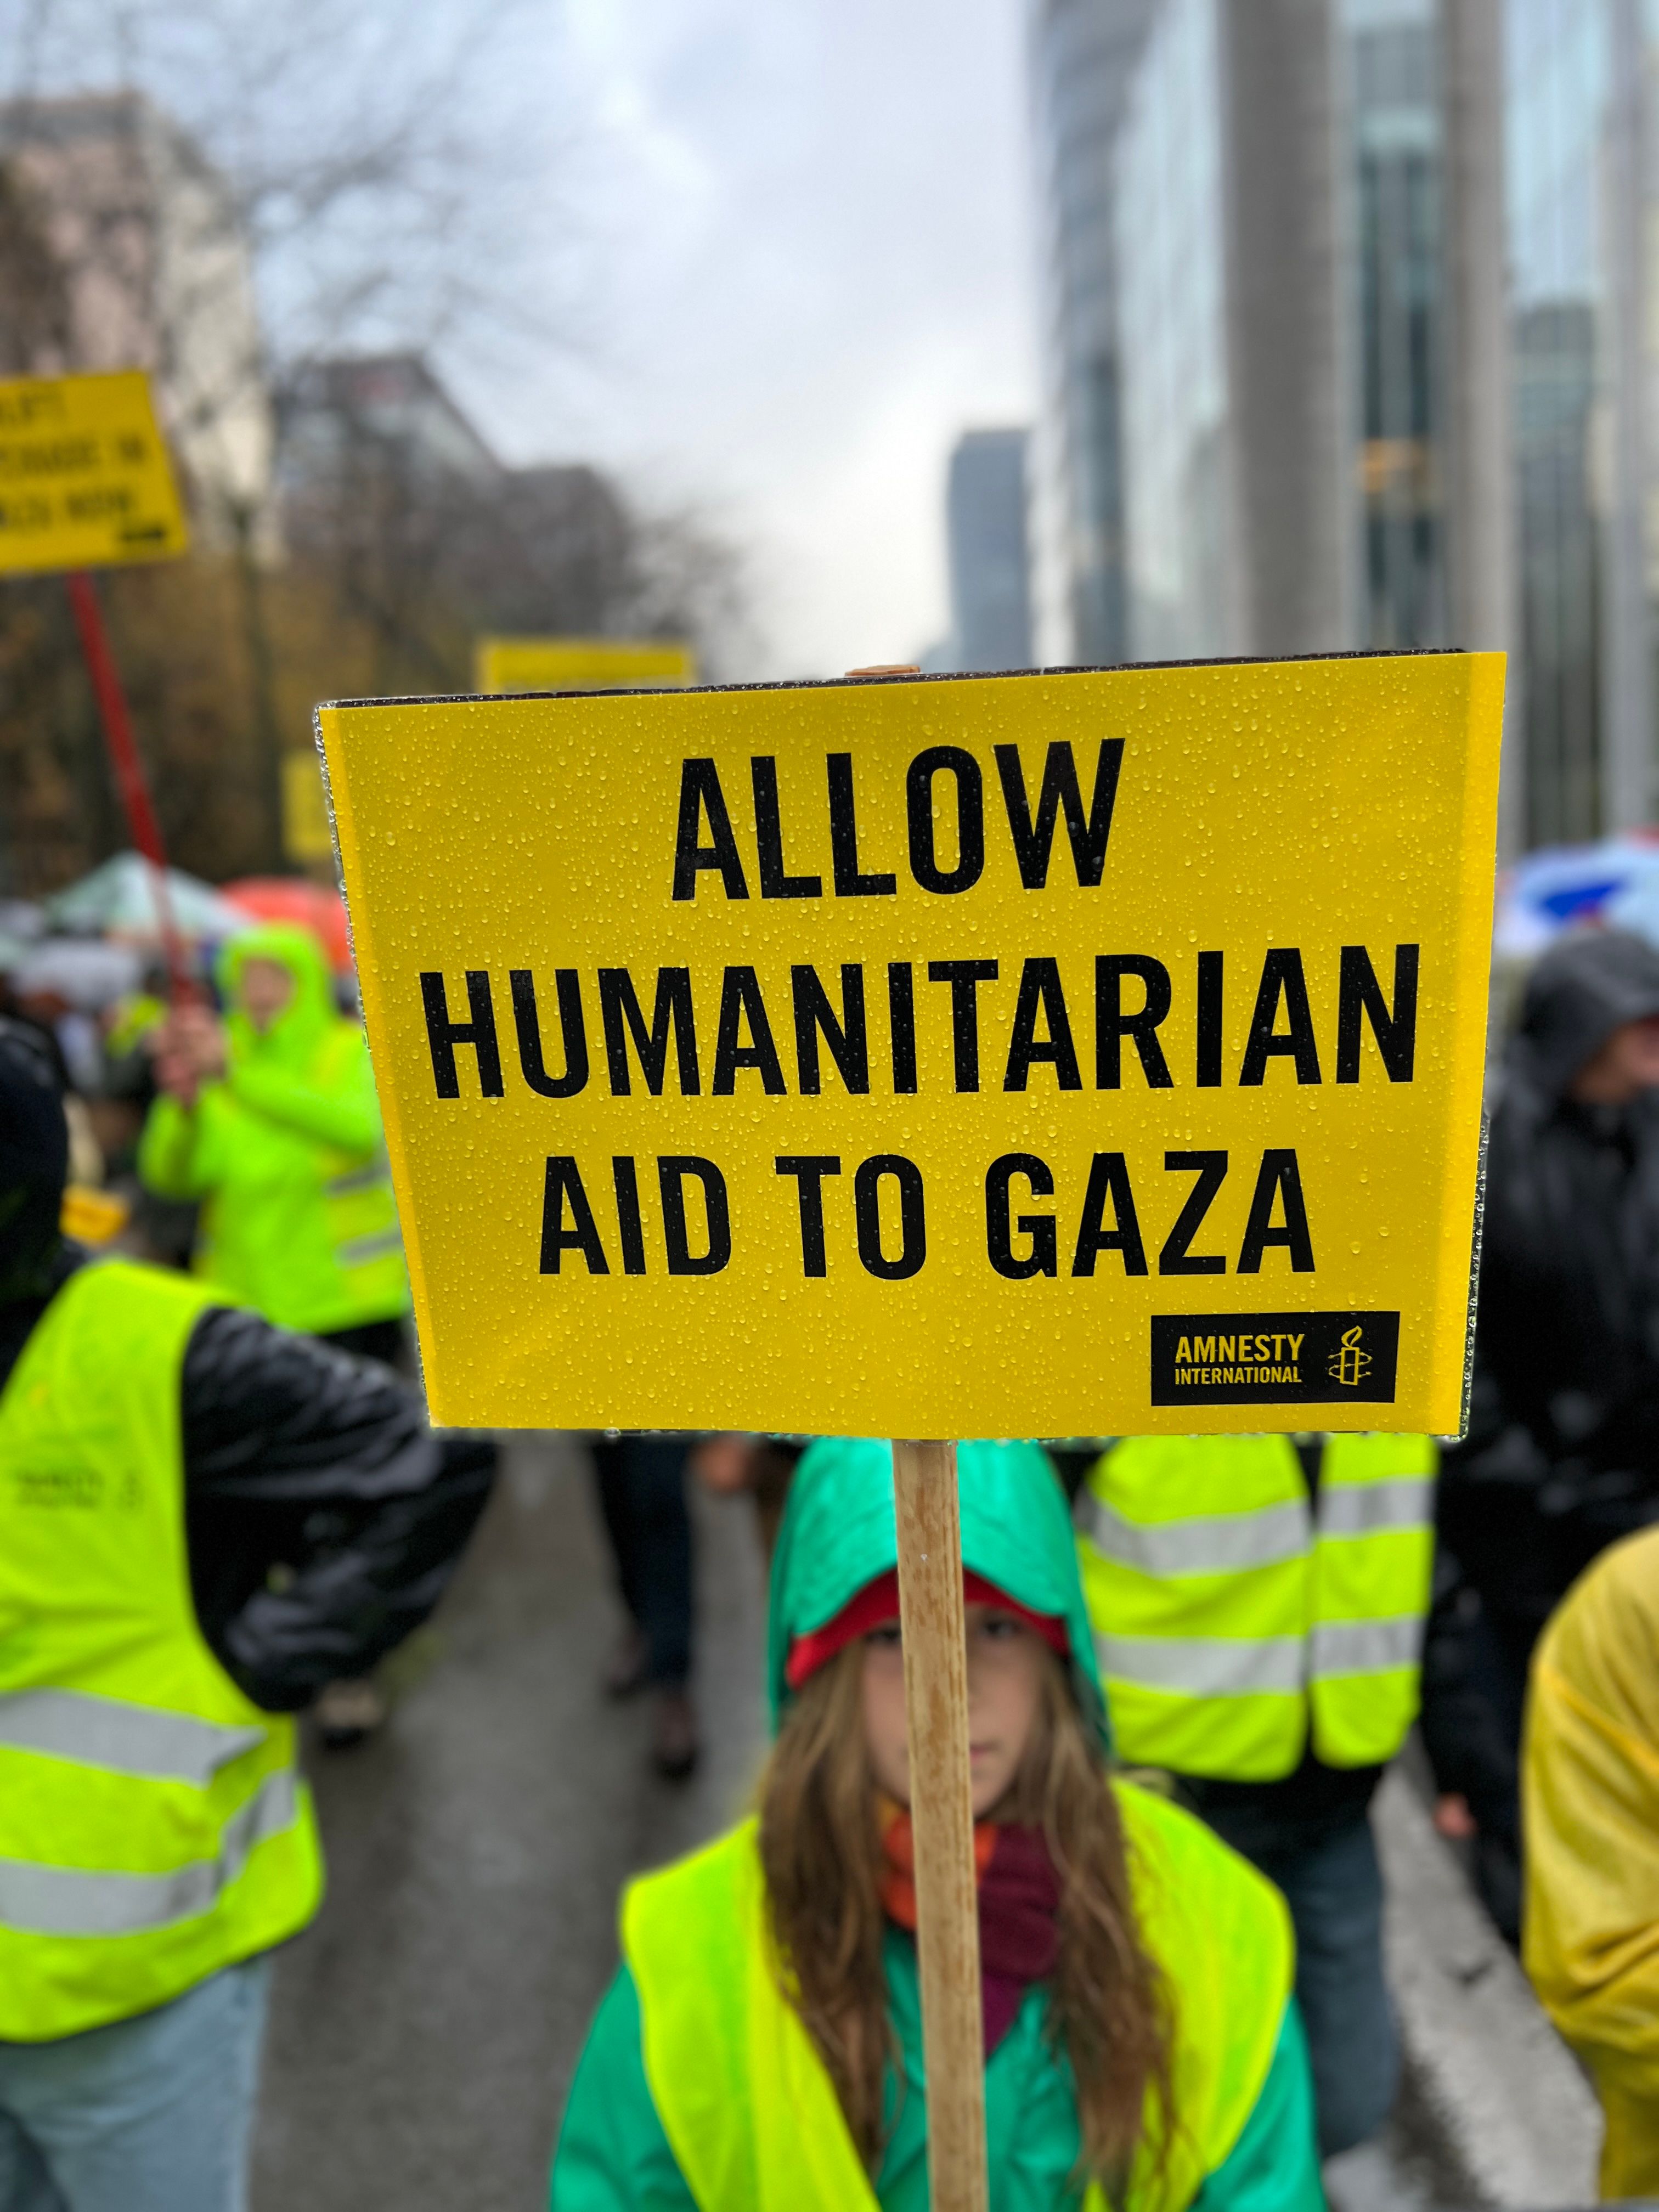 An amnesty supporter holds a sign calling for humanitarian aid in Gaza